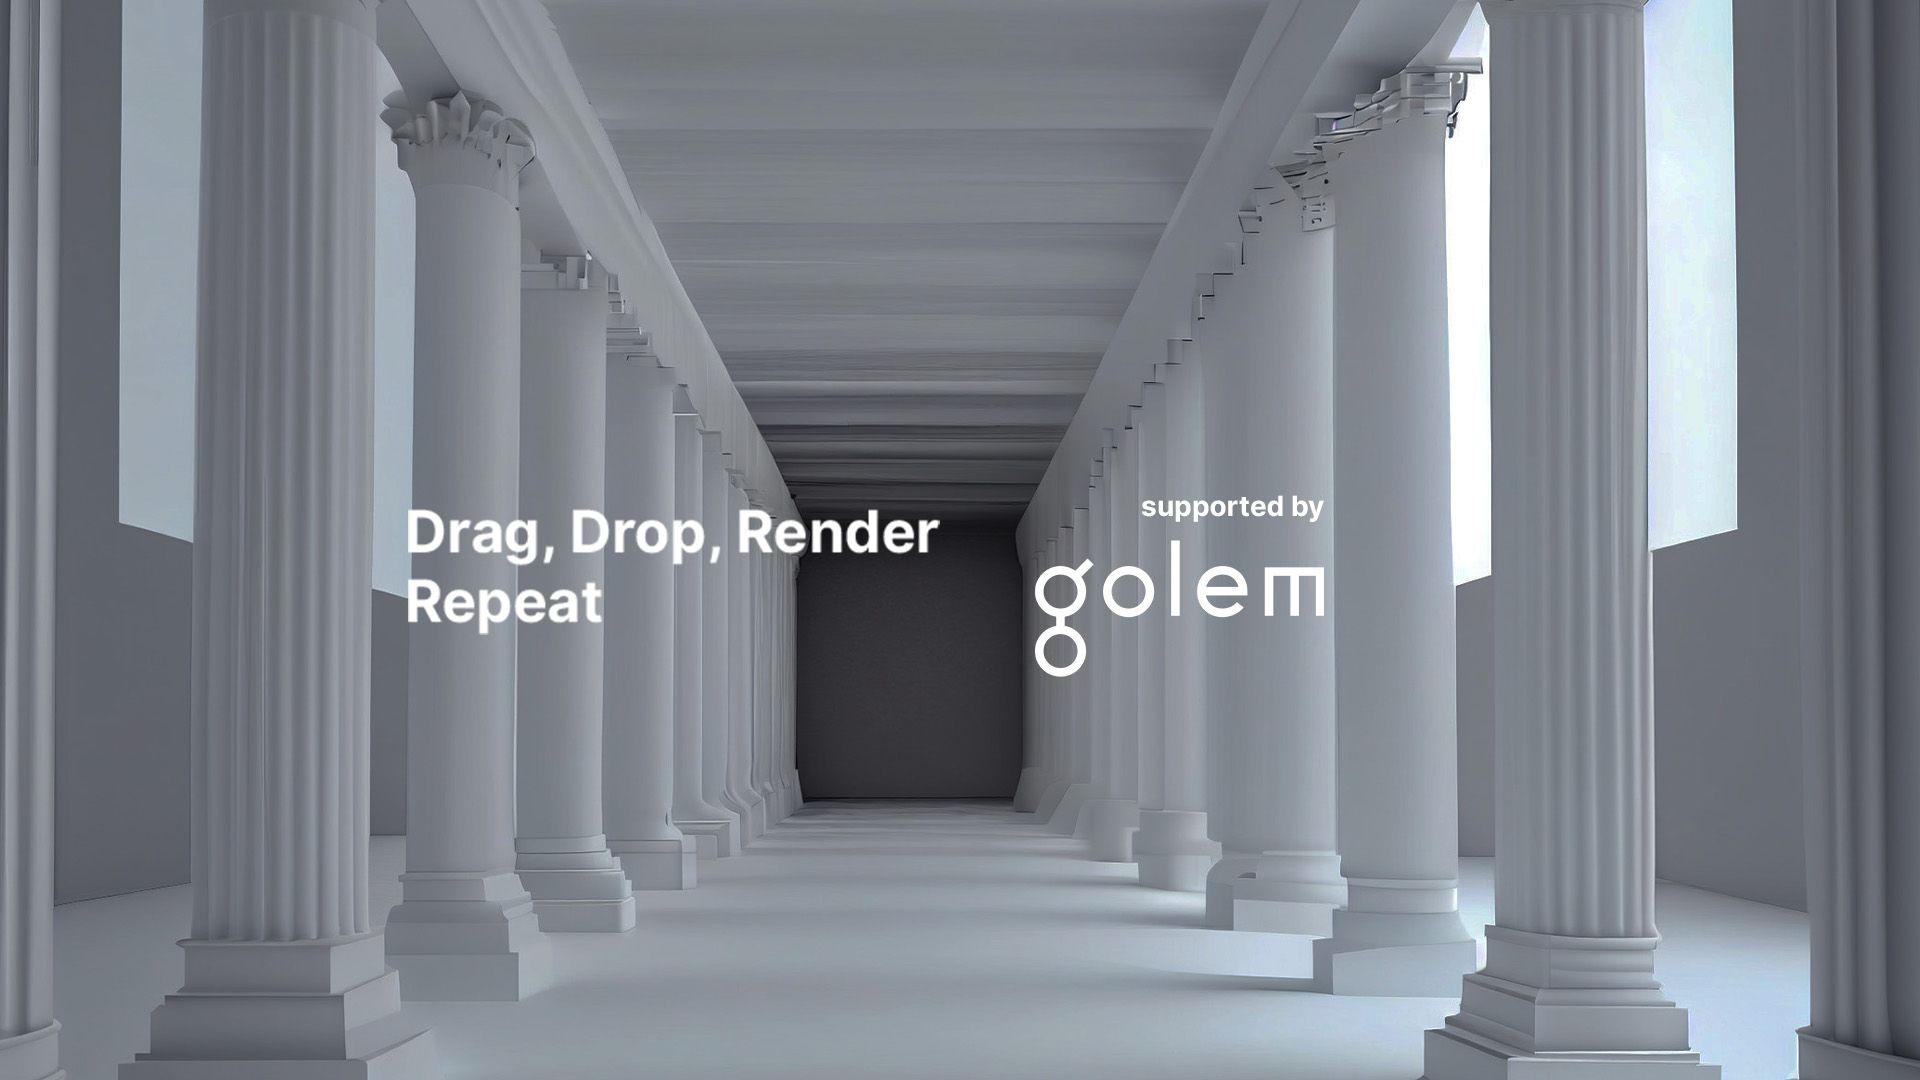 Accelerating Blender Animation Rendering with NVIDIA GPUs